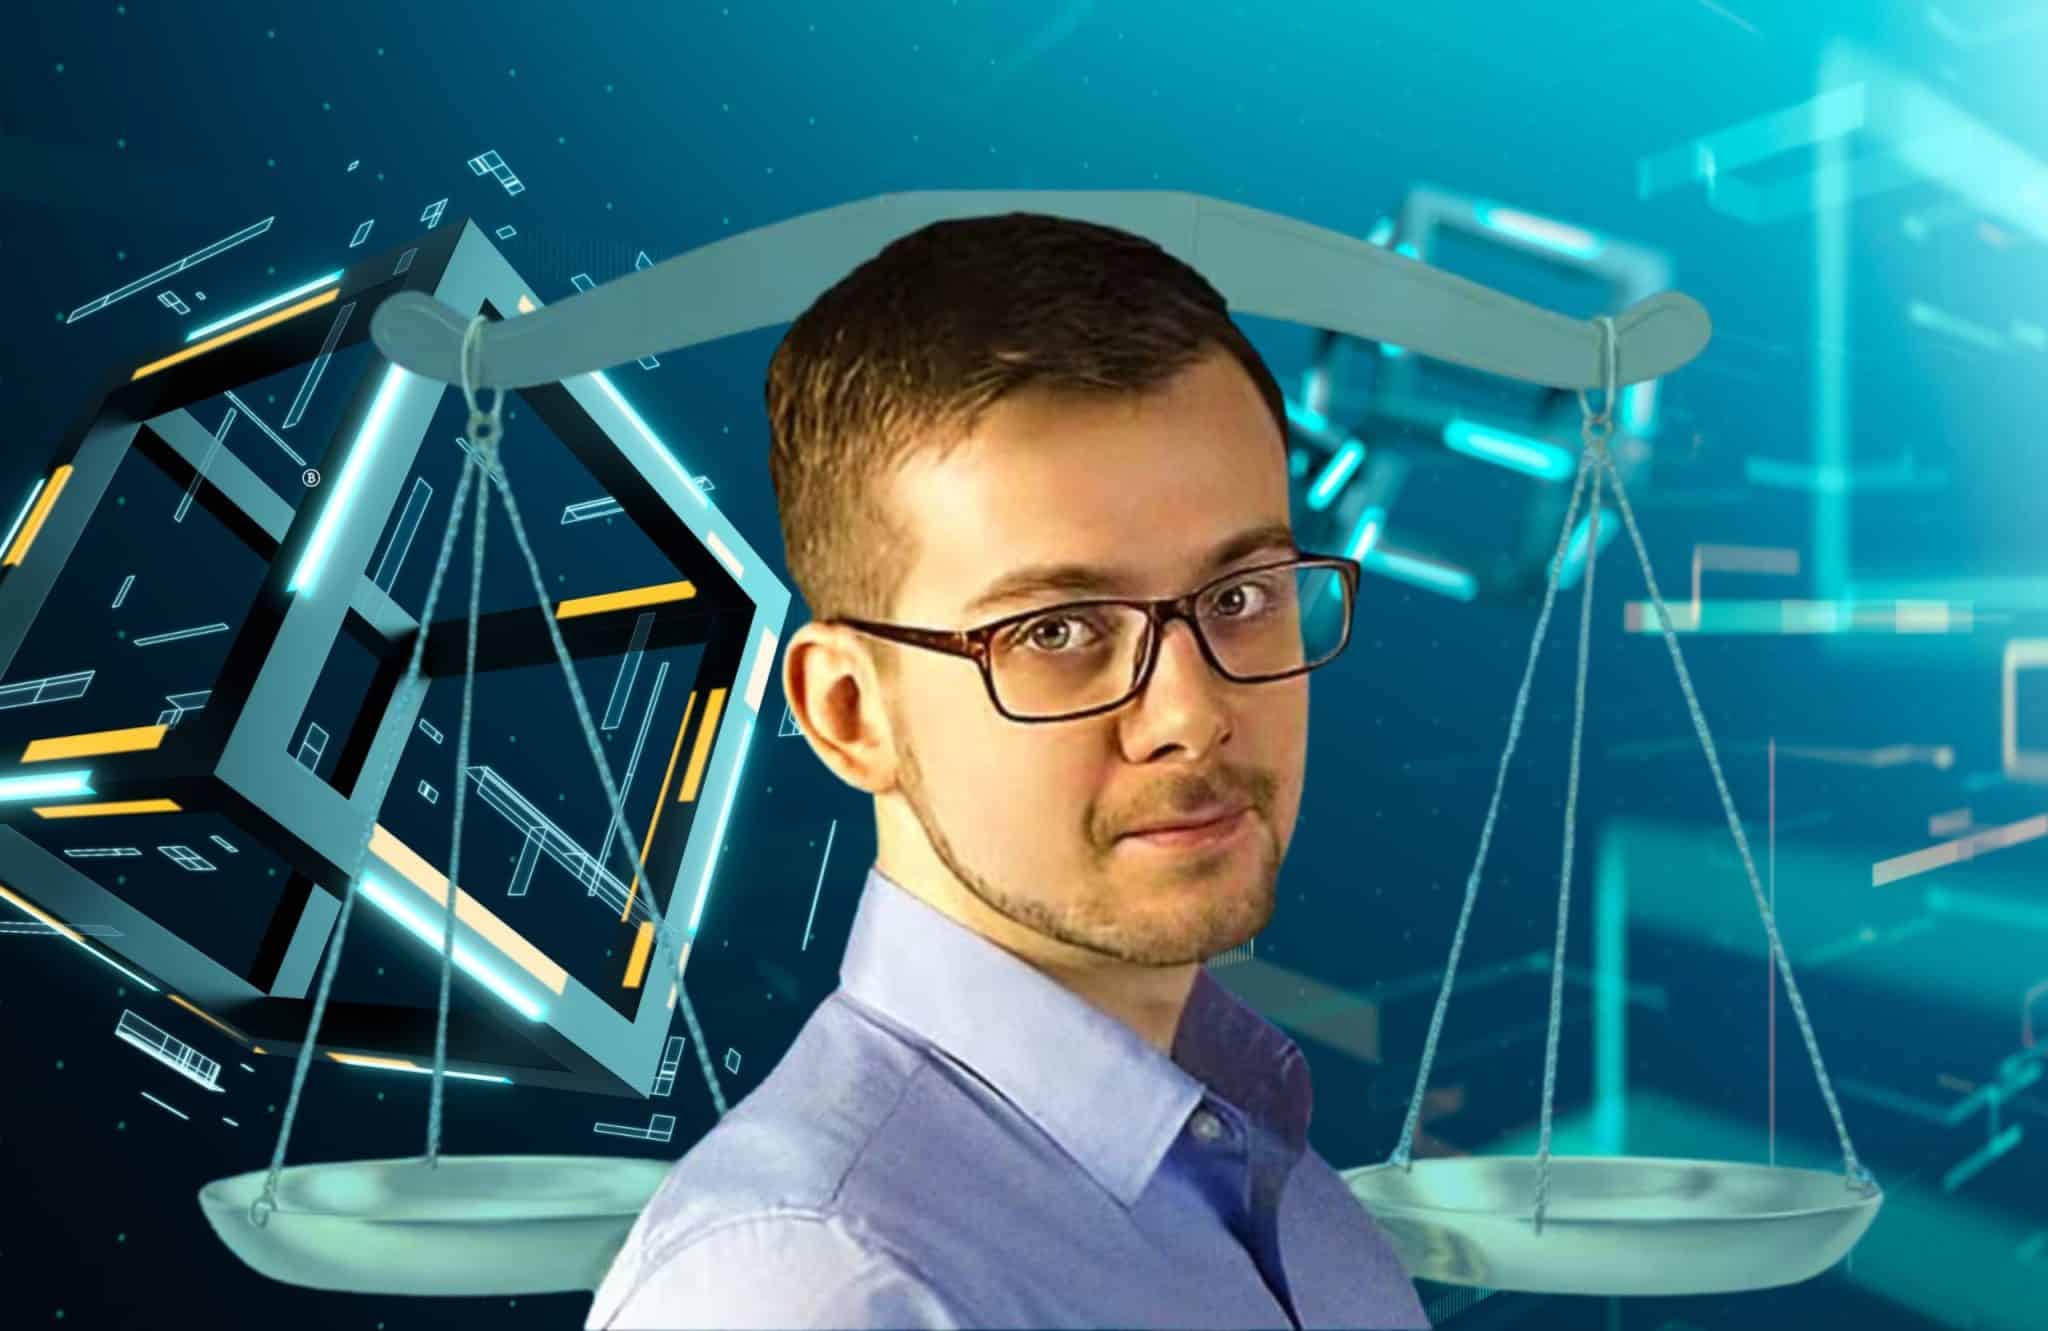 Free Alex: Privacy Coin Founder Alexey Pertsev sentenced to 5 years for Tornado Cash development - Free Alexey movement goes viral.